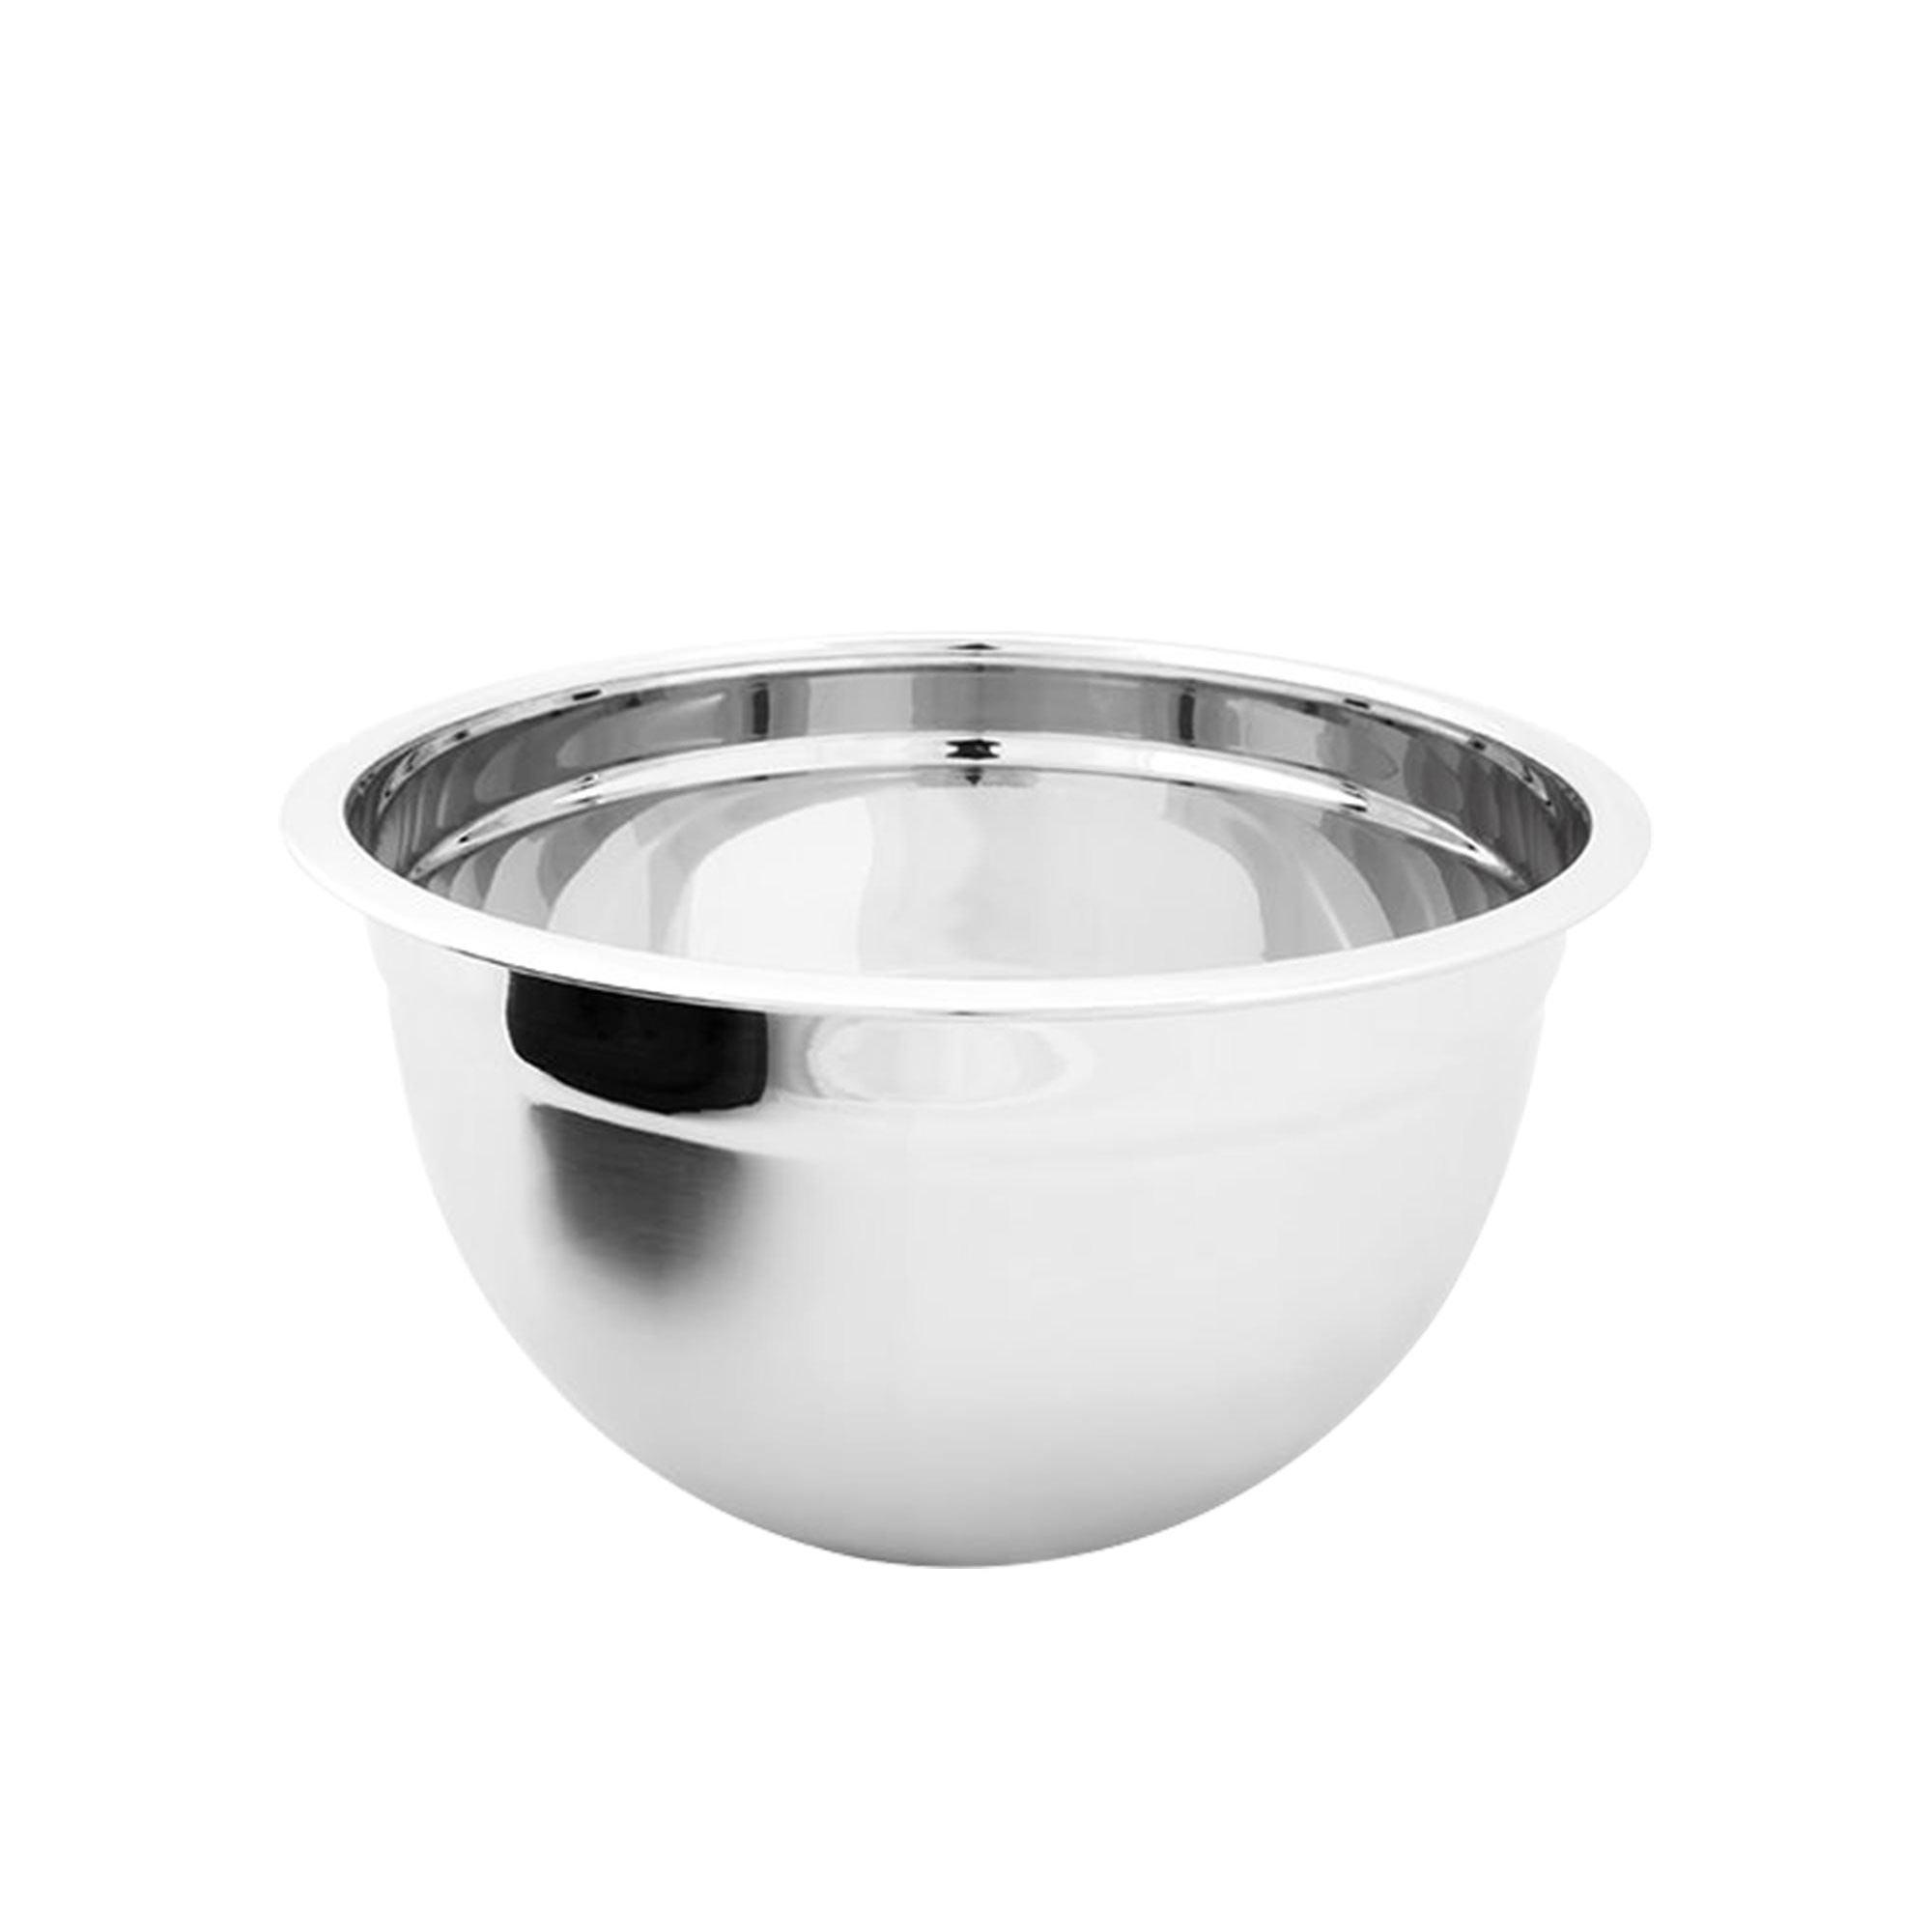 Cuisena Stainless Steel Mixing Bowl 22cm - 2.8L Image 1